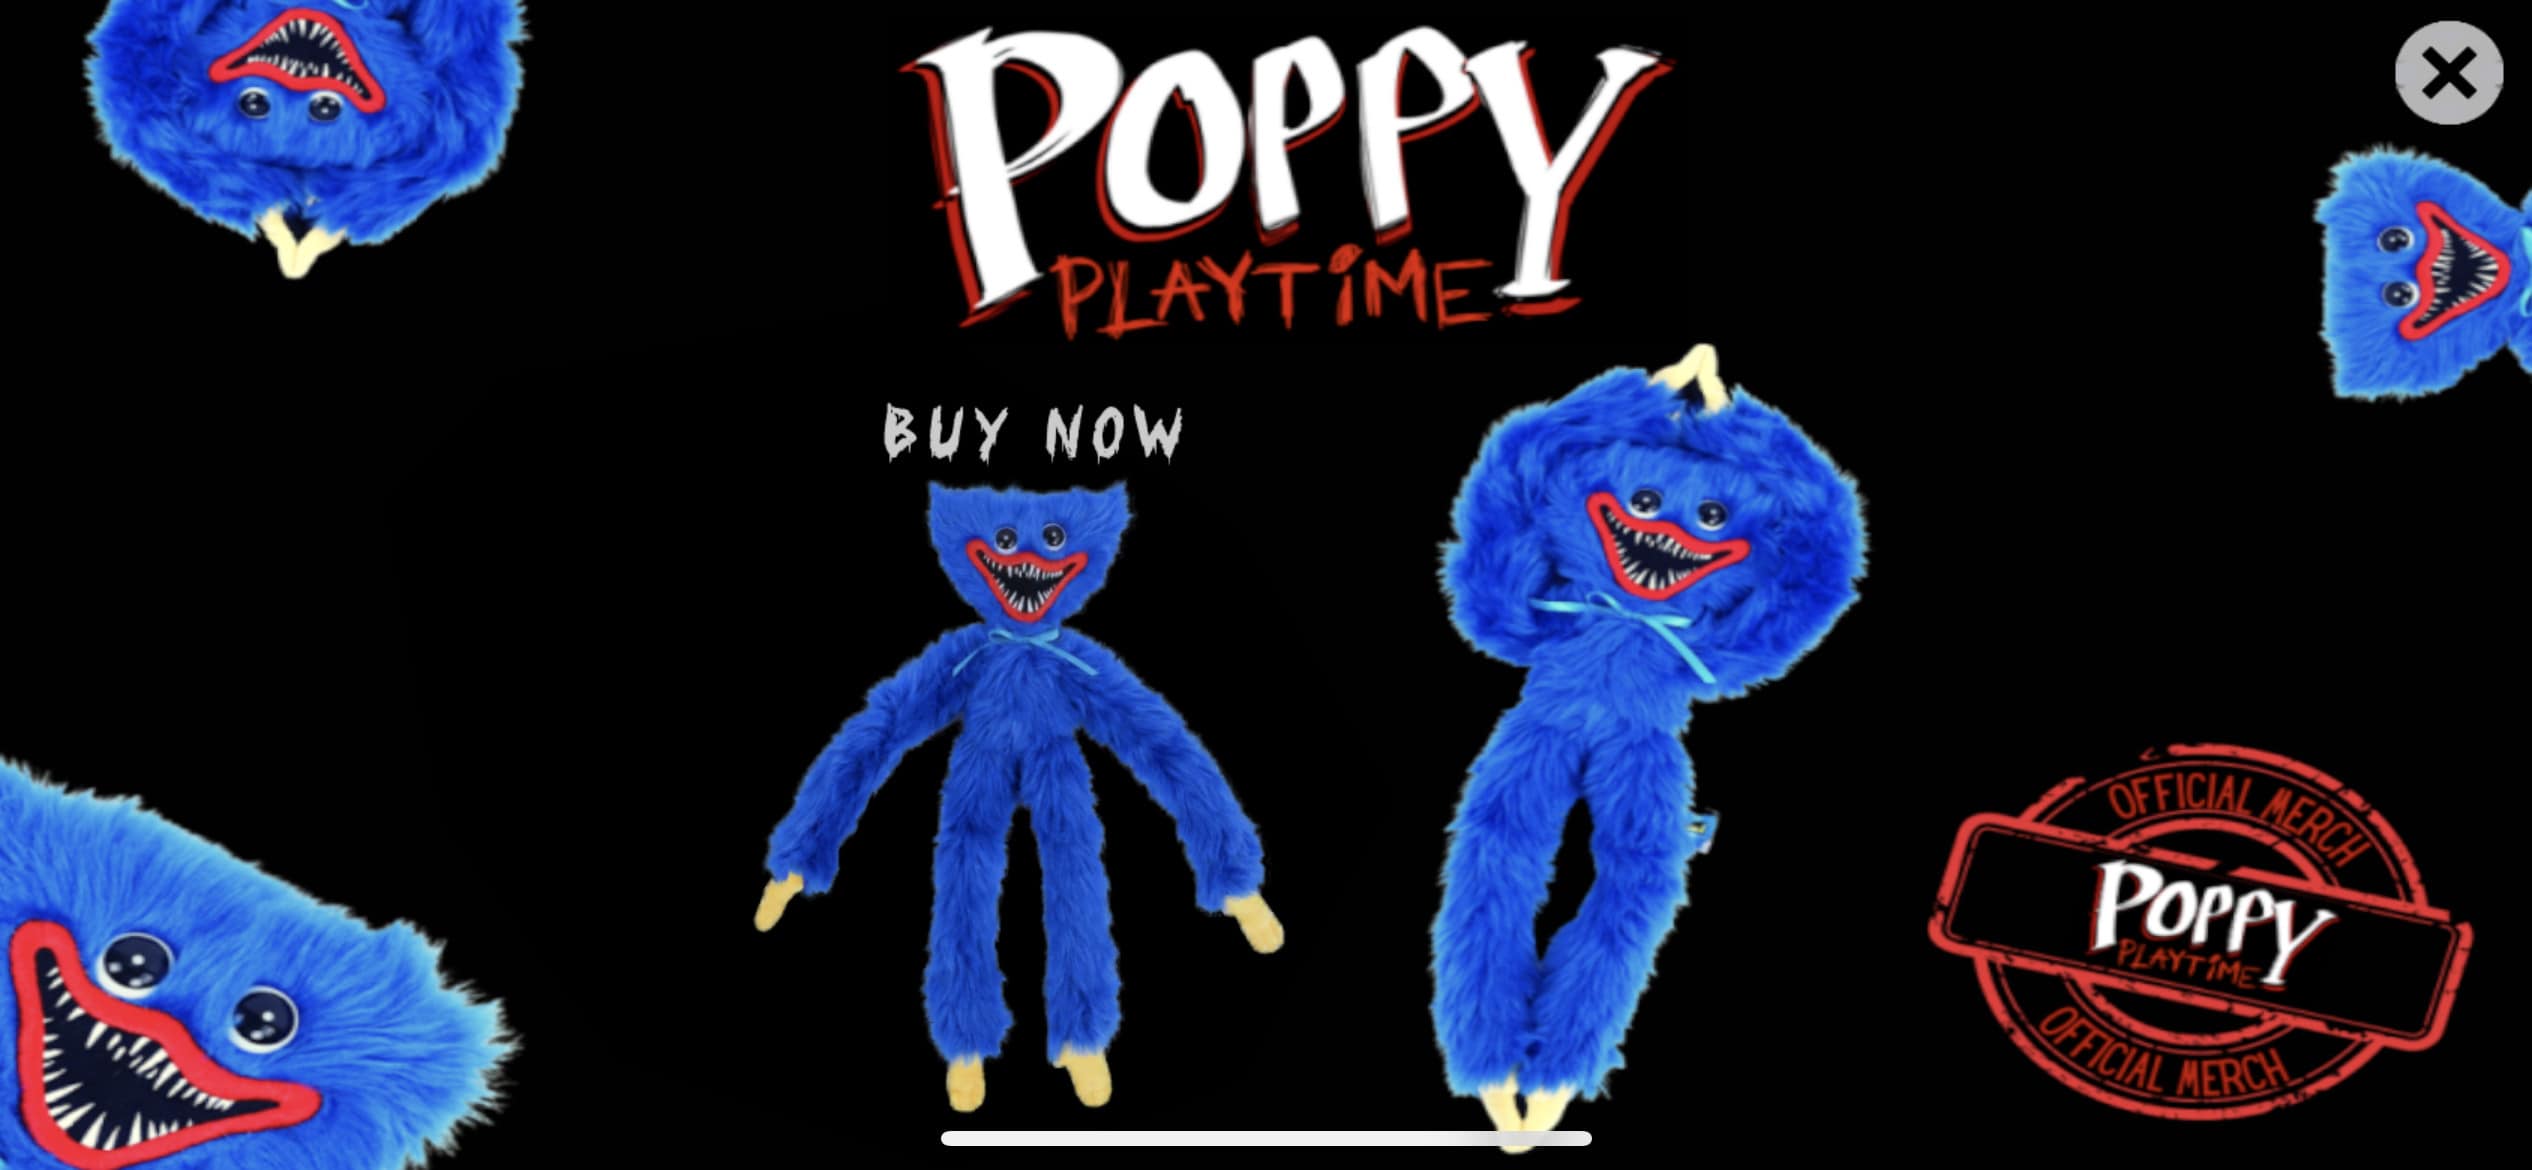 poppy playtime chapter 1 ios game